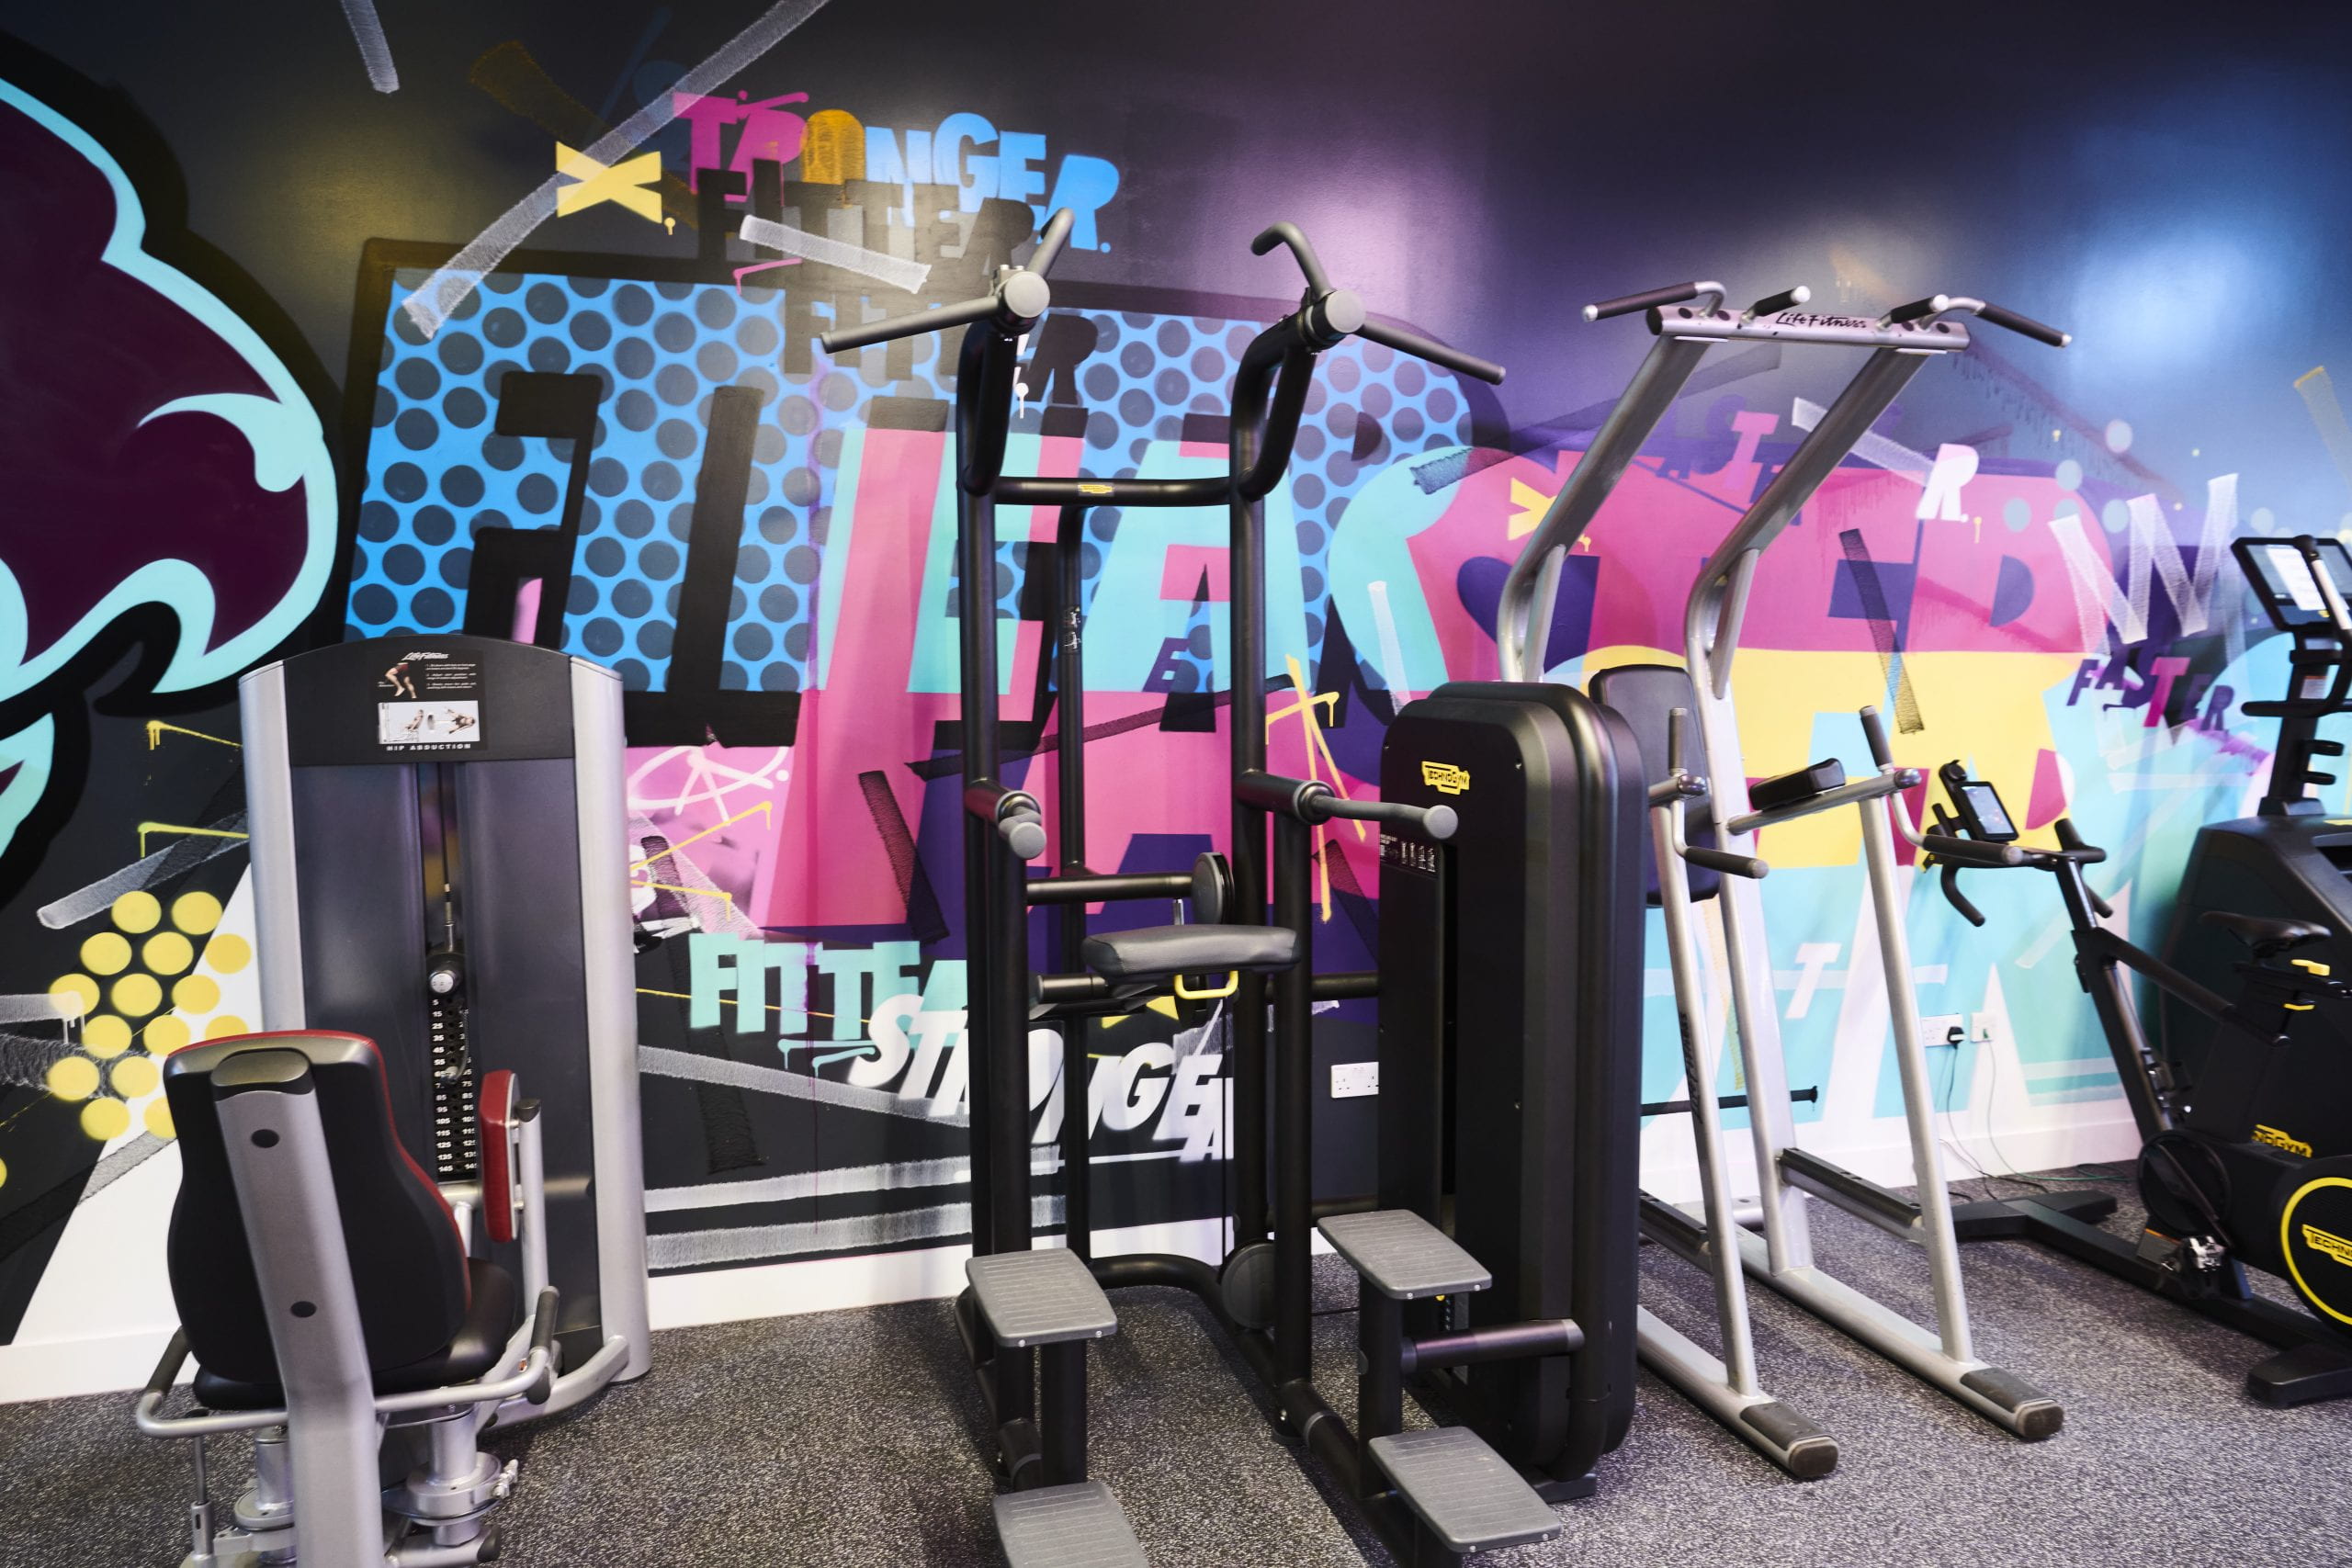 image of wall graffiti in the gym